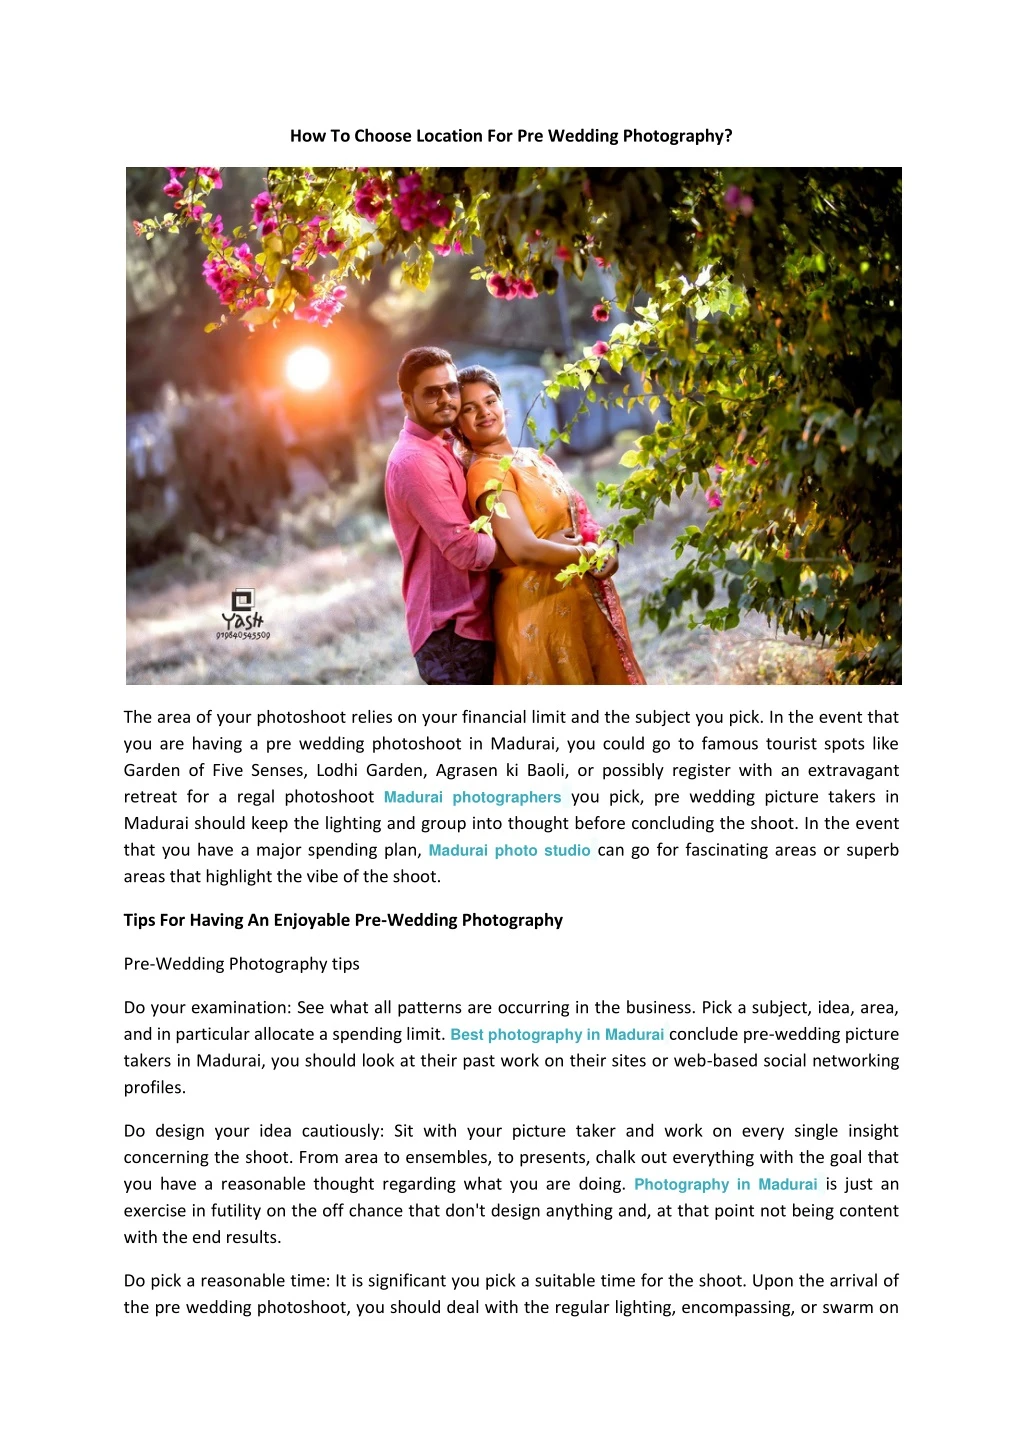 how to choose location for pre wedding photography